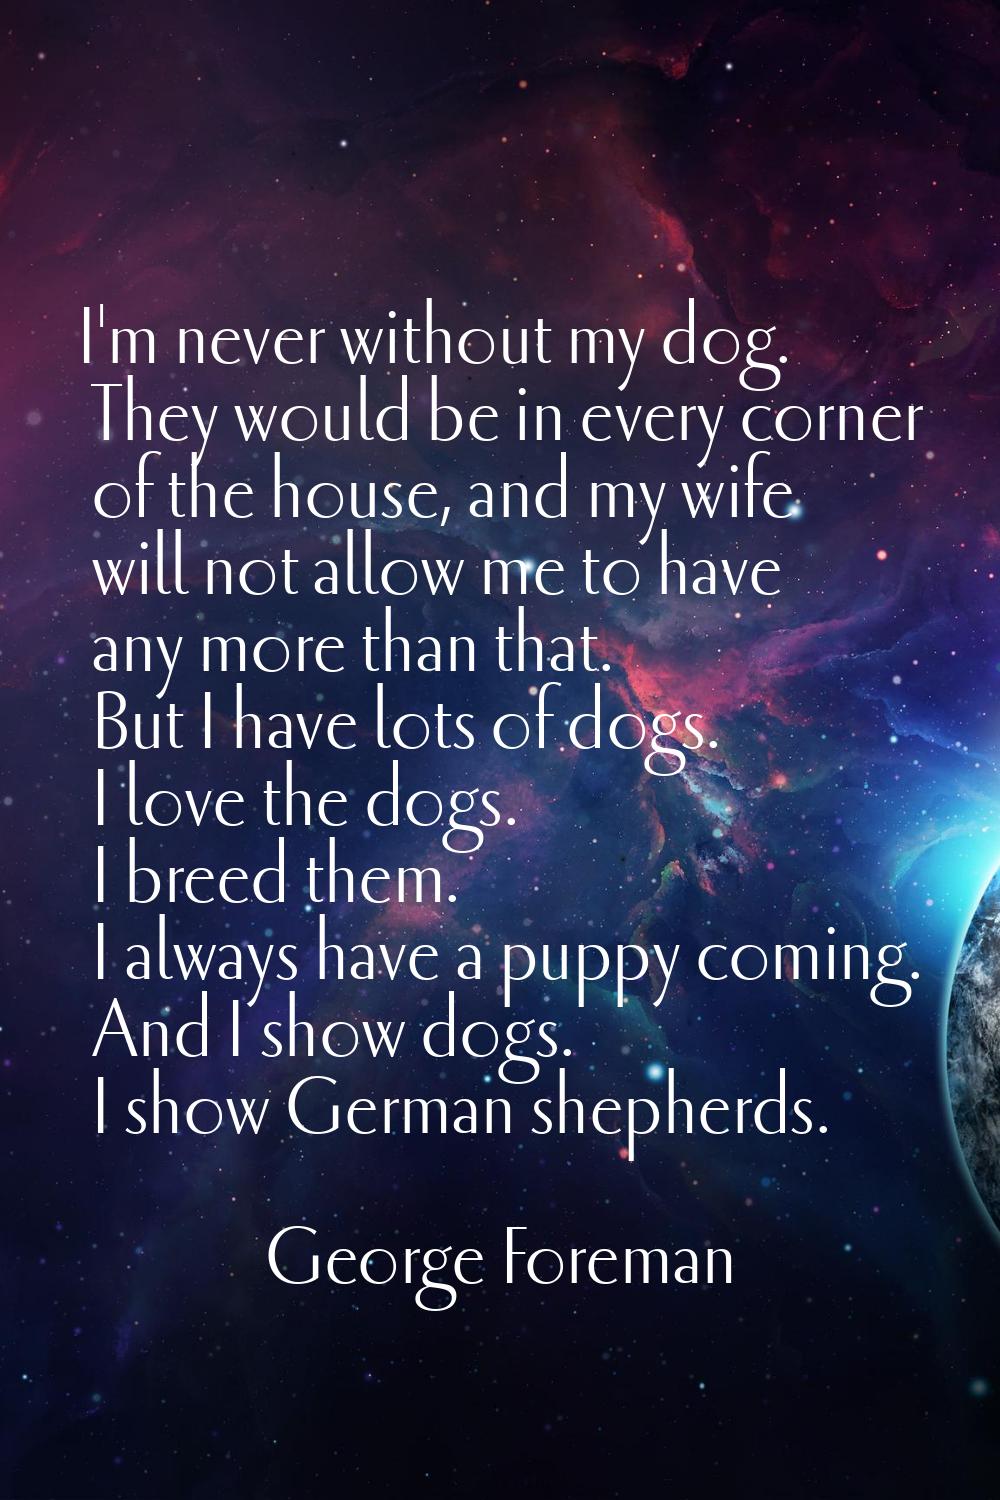 I'm never without my dog. They would be in every corner of the house, and my wife will not allow me